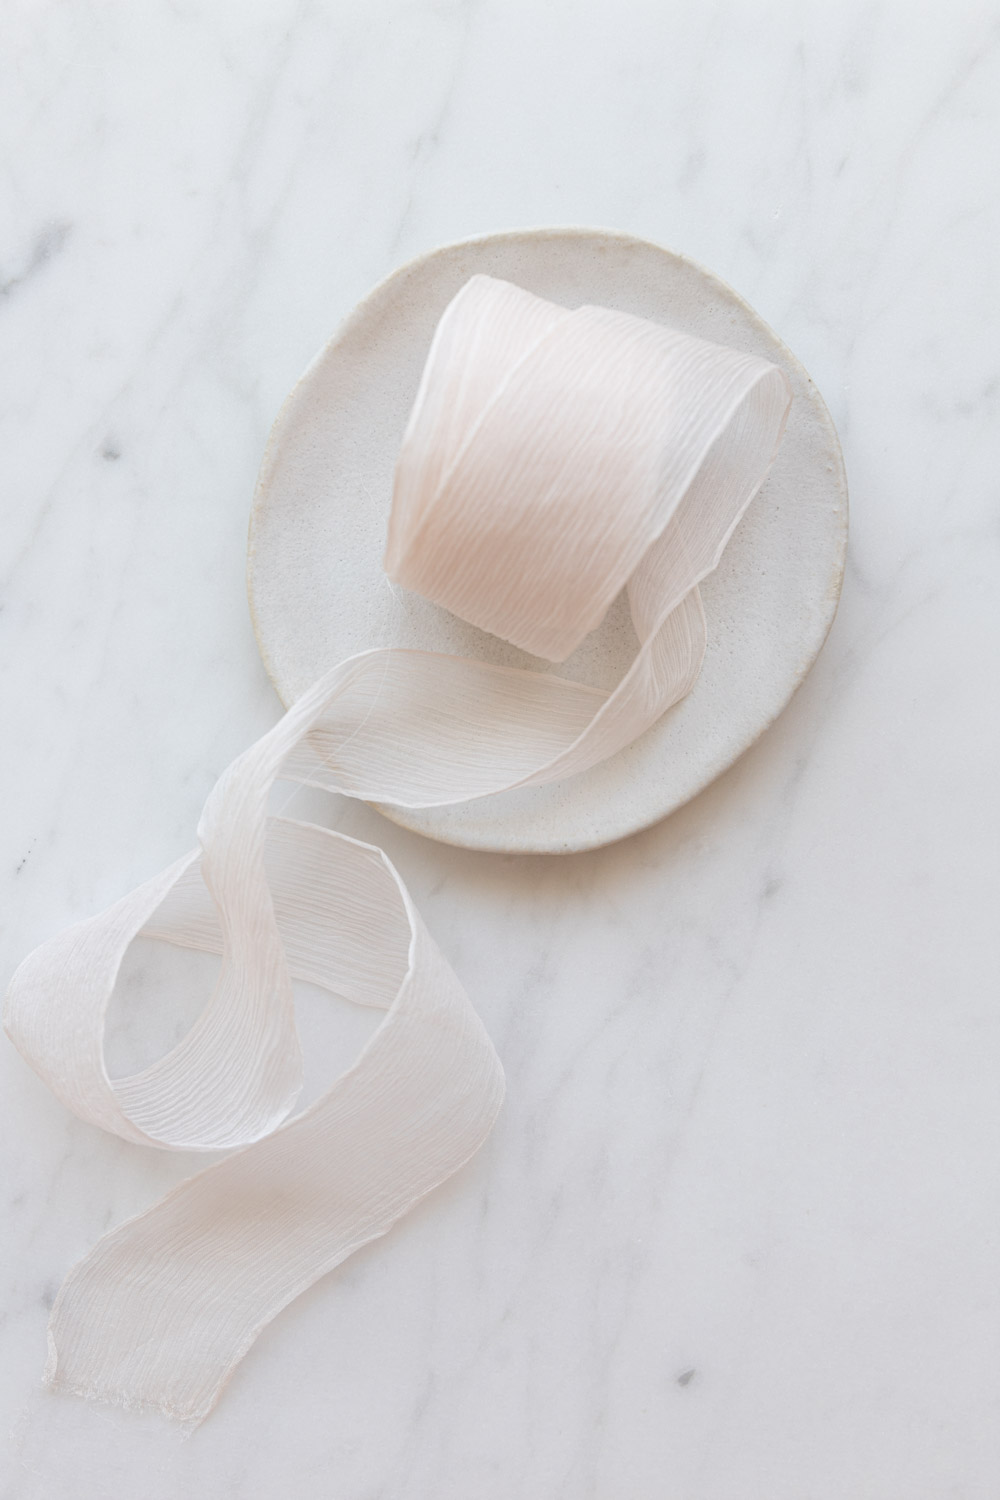 Hand Dyed Mousseline Crepon Silk Ribbon - Nude